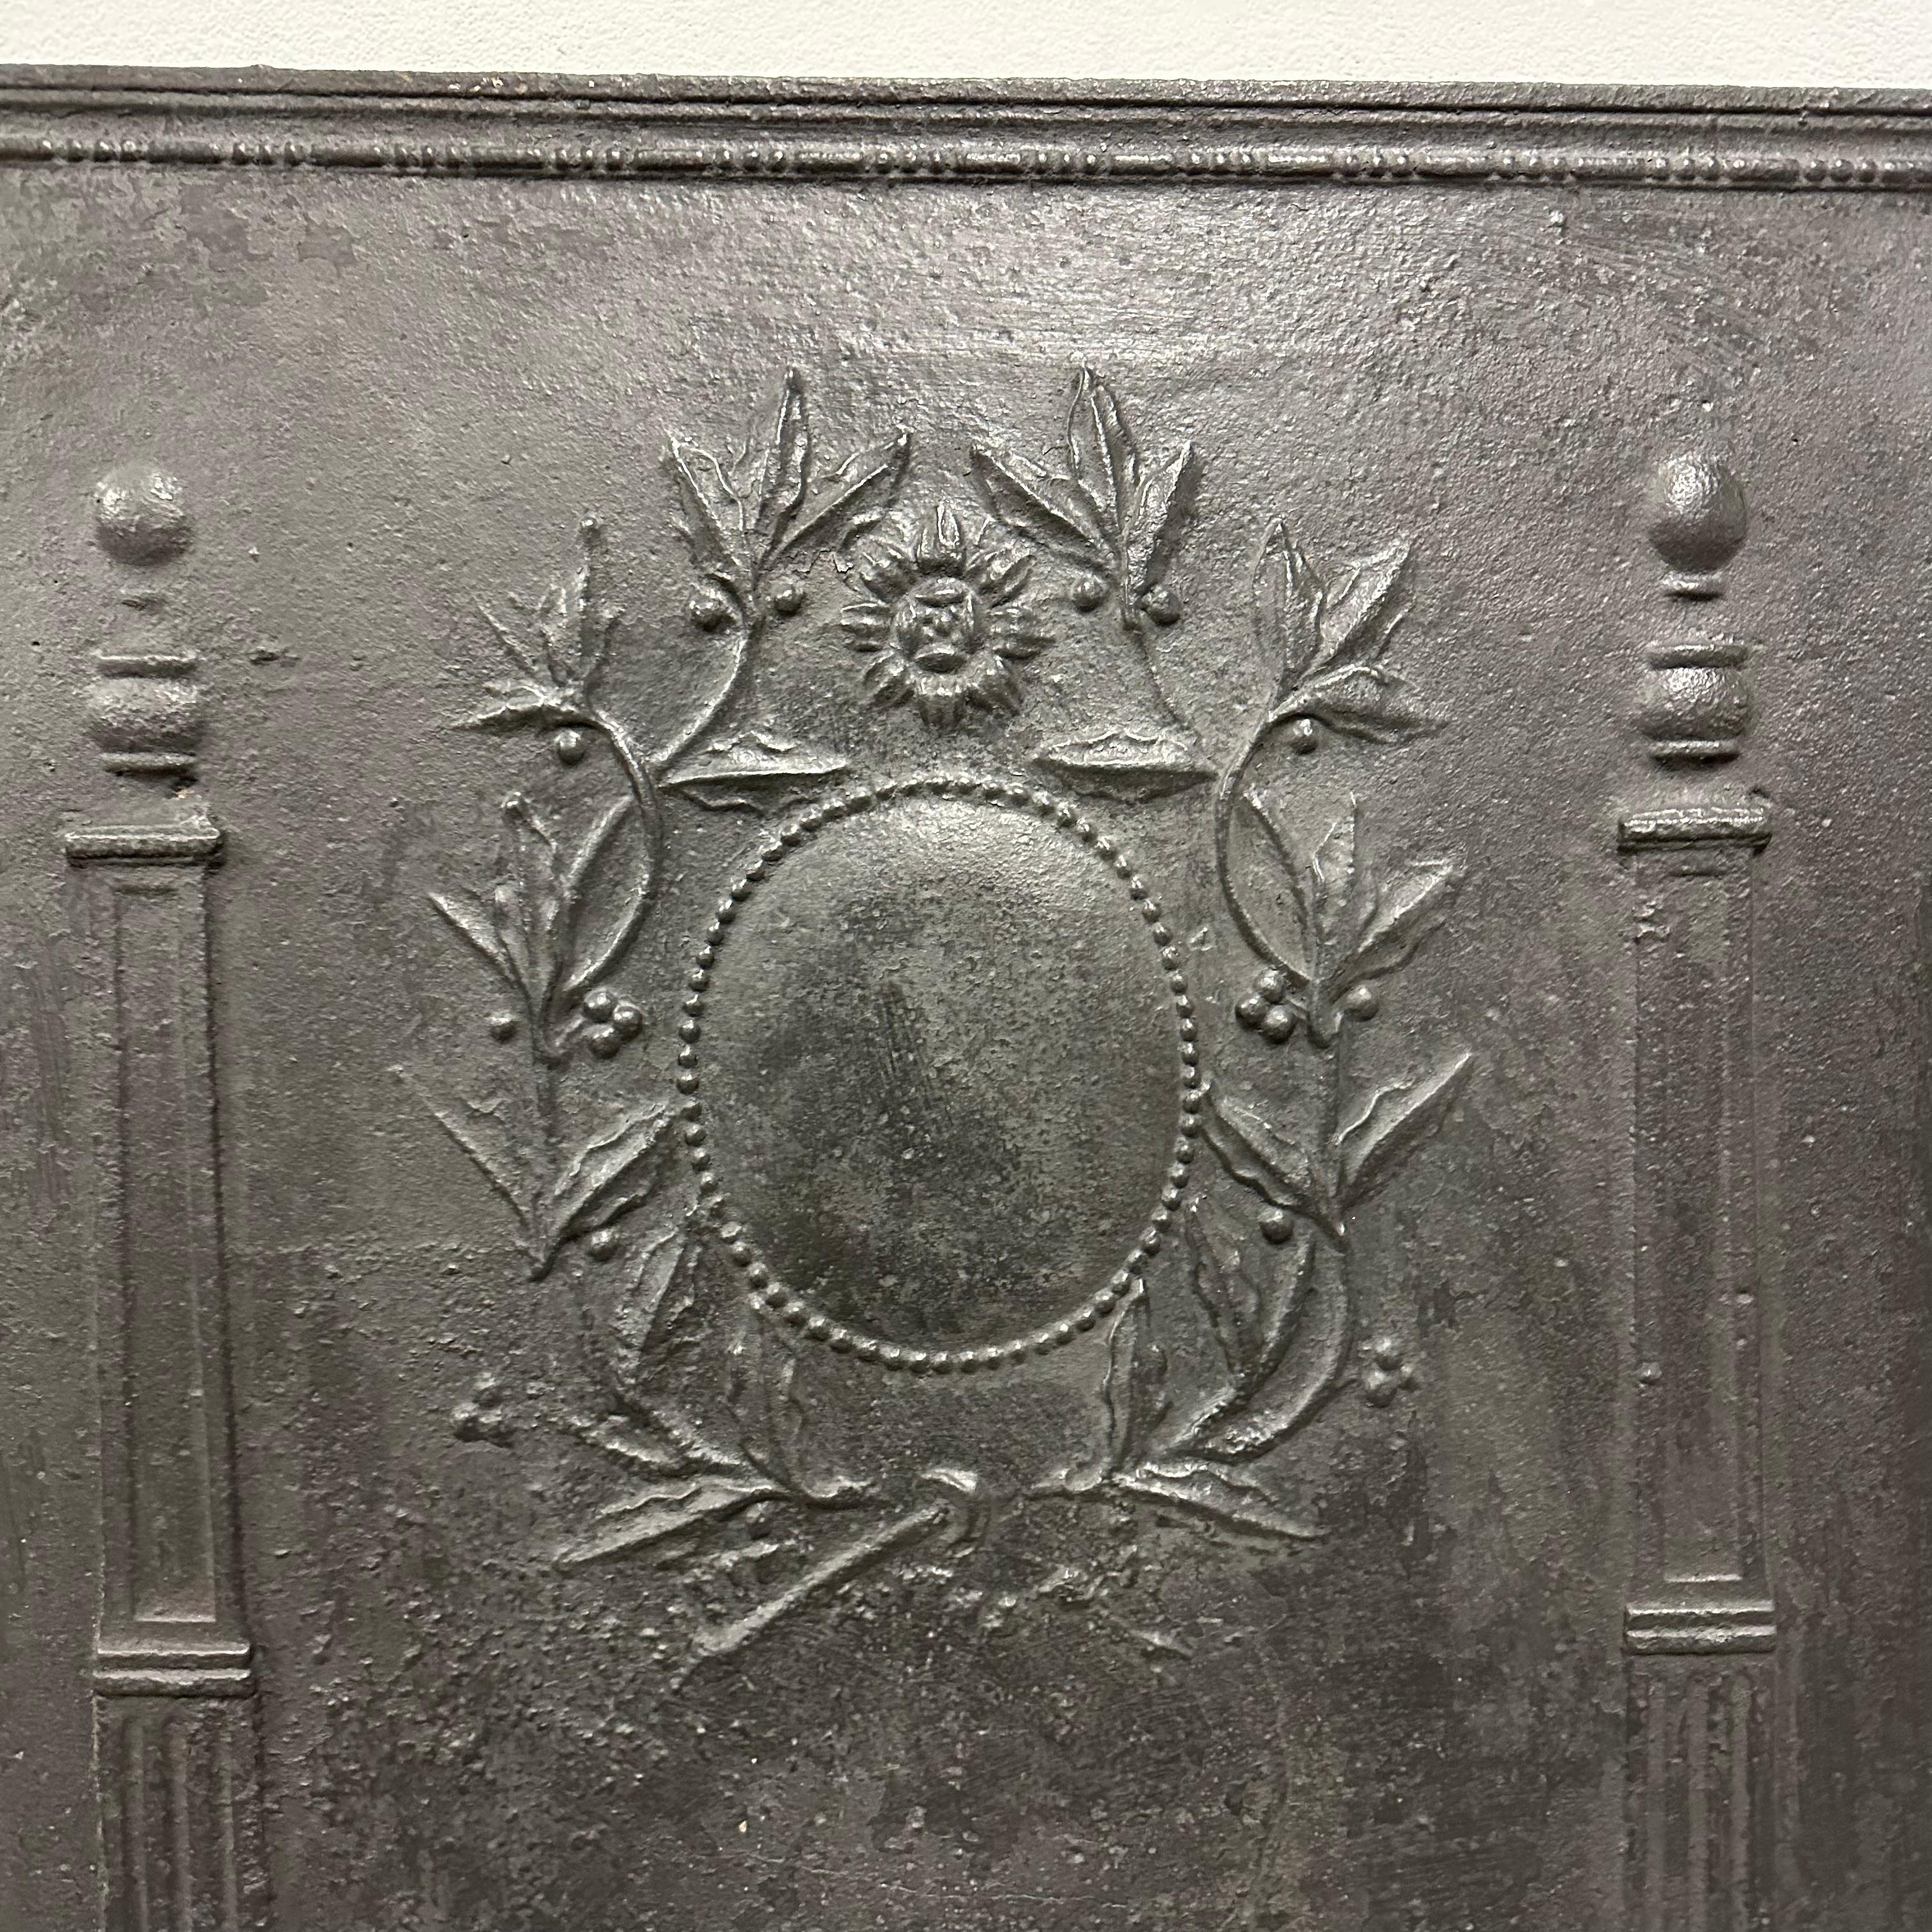 A nice square cast iron fireback / backsplash.
Two decorative pillars with lovely floral deorations in between.

Great piece!